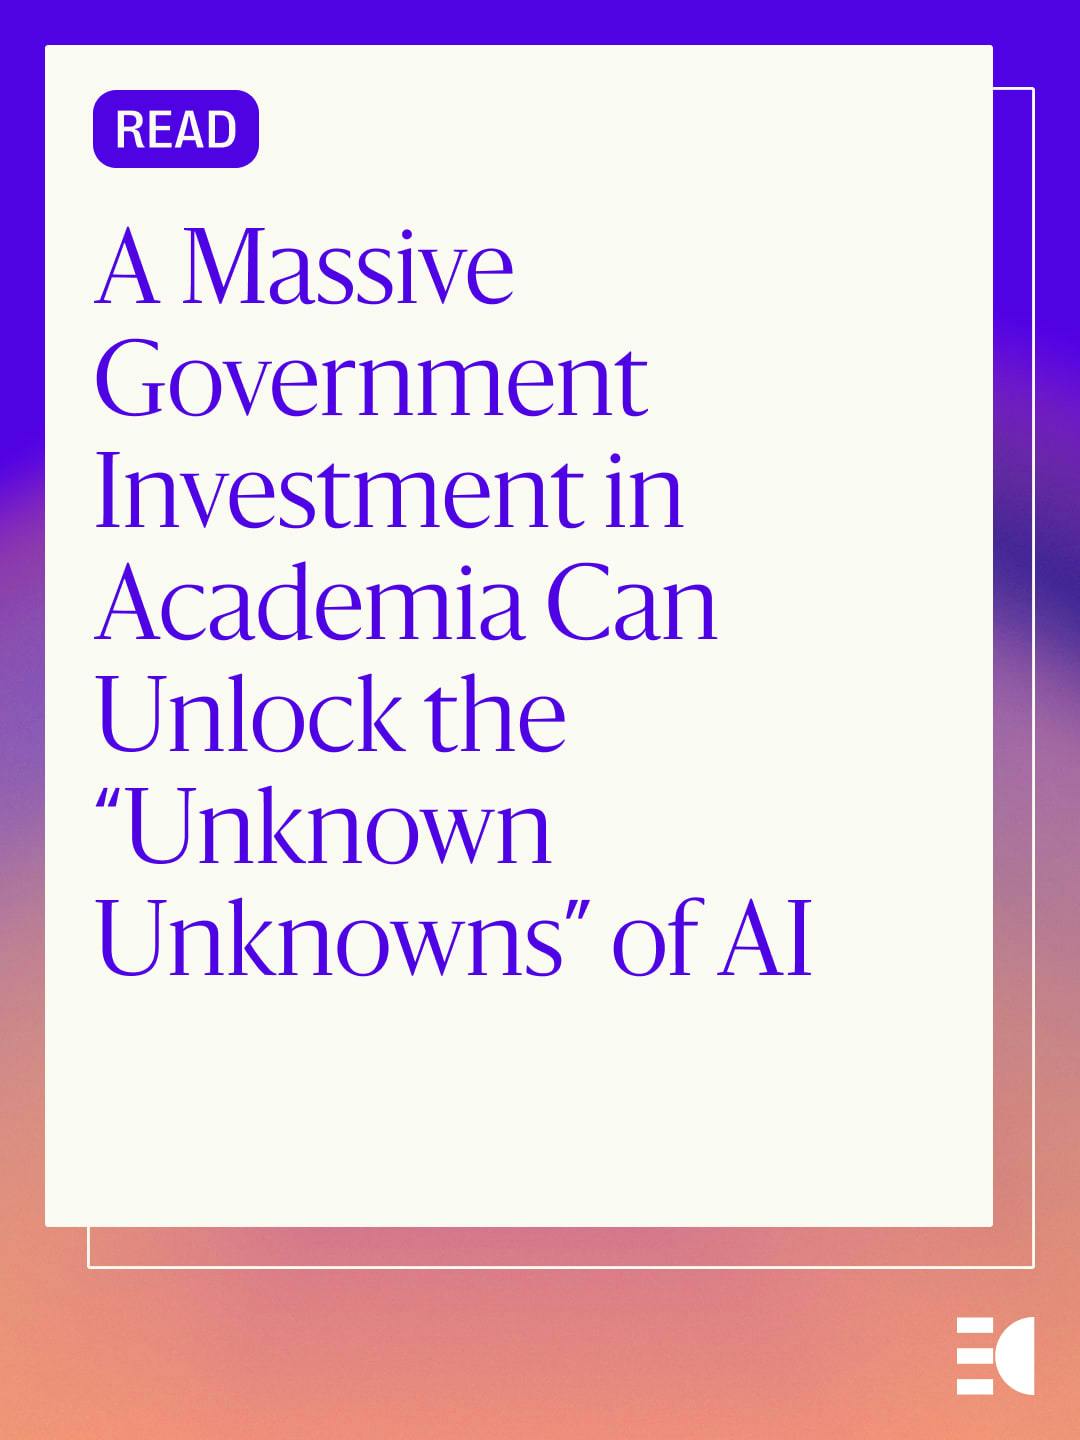 Read: A Massive Government Investment in Academia Can Unlock the “Unknown Unknowns” of AI